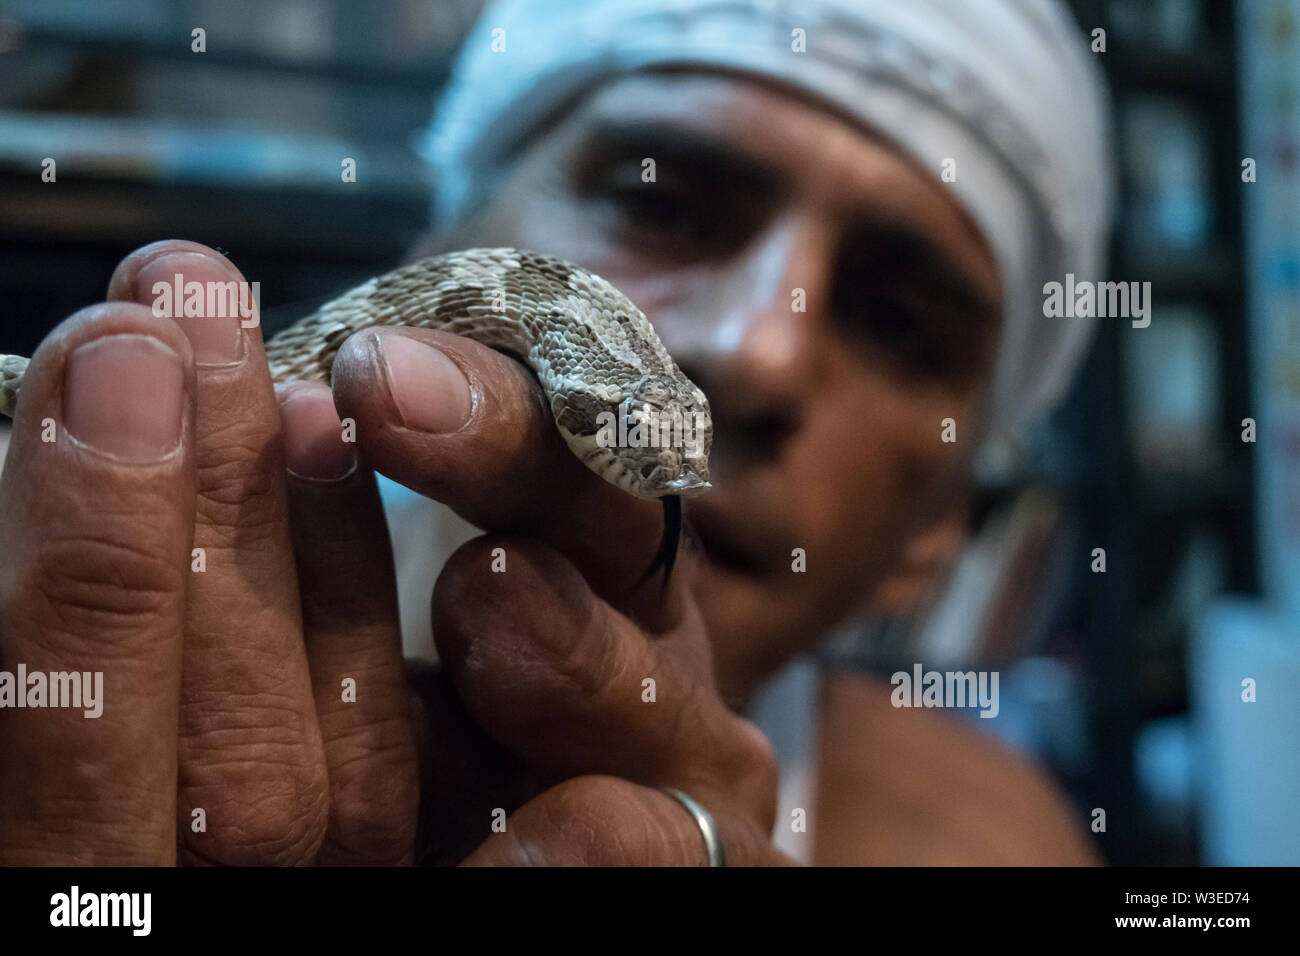 Karmei Yosef, Israel. 15th July, 2019. Israeli snake handler, breeder and catcher RAFAEL YIFRACH, 52, handles a Hognose Snake in his home in Karmei Yosef. Yifrach has been intrigued by snakes since he was seven years old, he’s been bitten by venomous snakes 18 times and currently grows and breeds some 300 non venomous snakes. World Snake Day is celebrated 16th July contributing to the cause of conservation of a sometimes dangerous but mostly misrepresented reptile. Credit: Nir Alon/Alamy Live News. Stock Photo